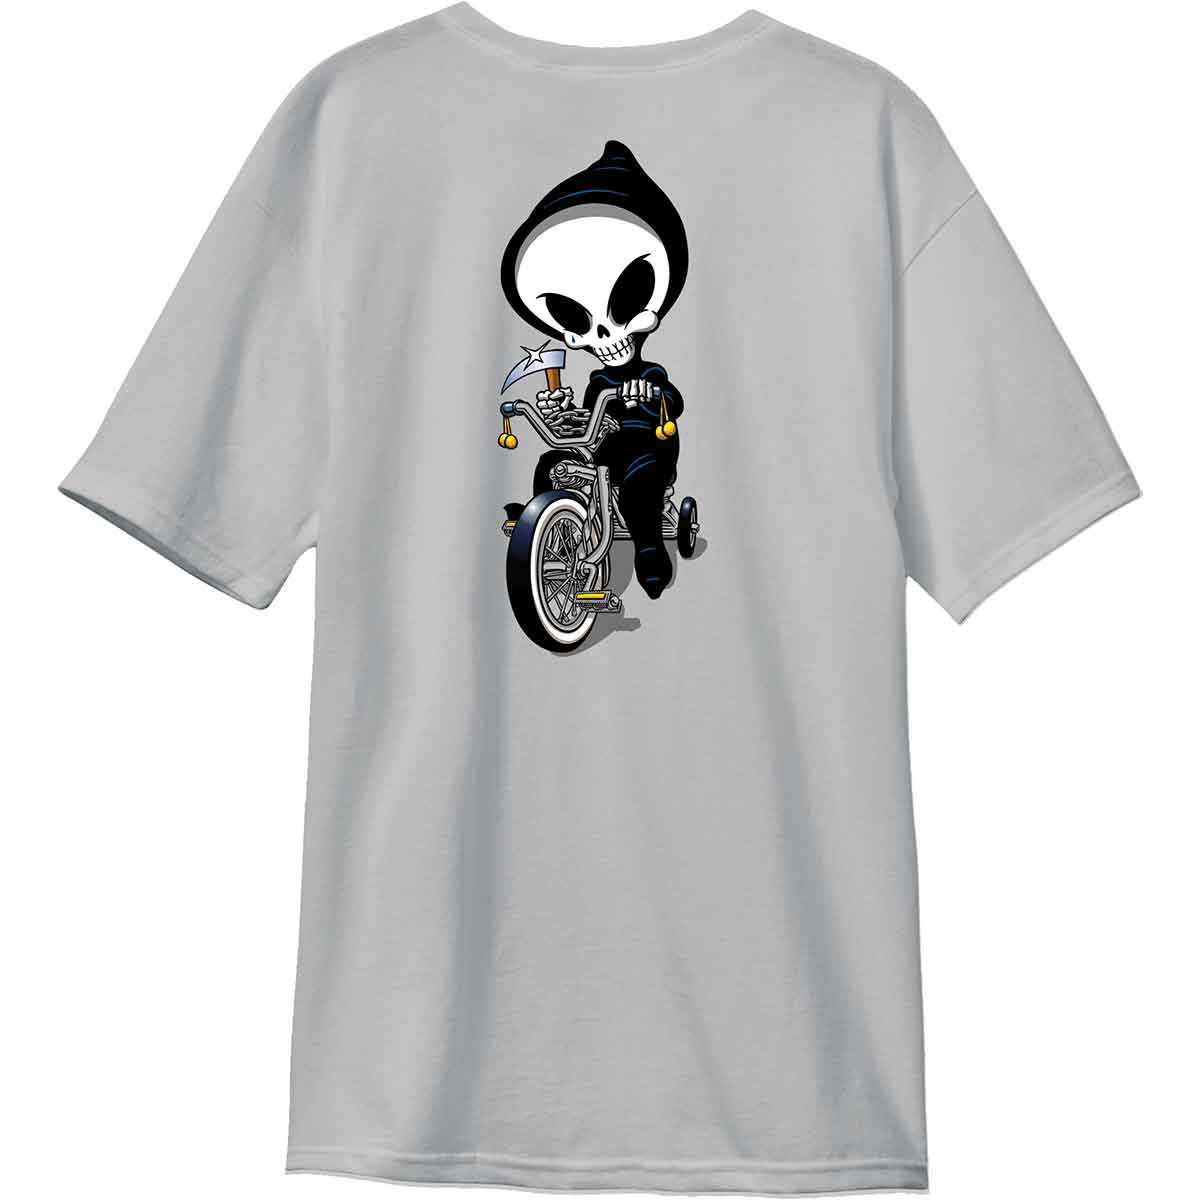 Tricycle Reaper Premium S/S Tee Shirt Silver (size options listed)